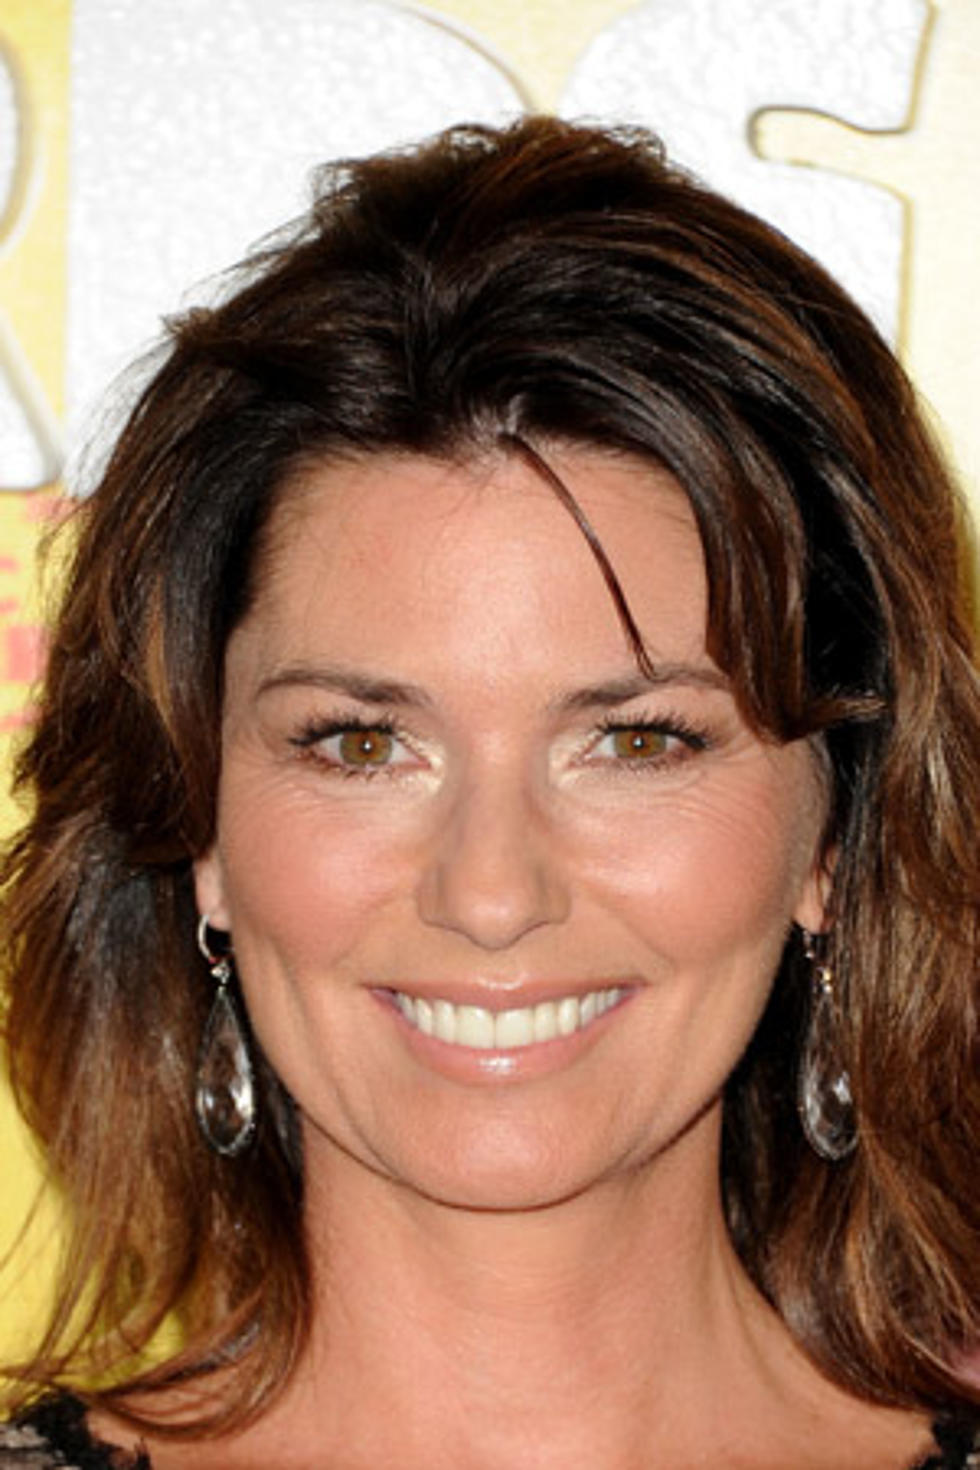 Shania Twain Stalker Lashes Out at Court After Being Denied Bail